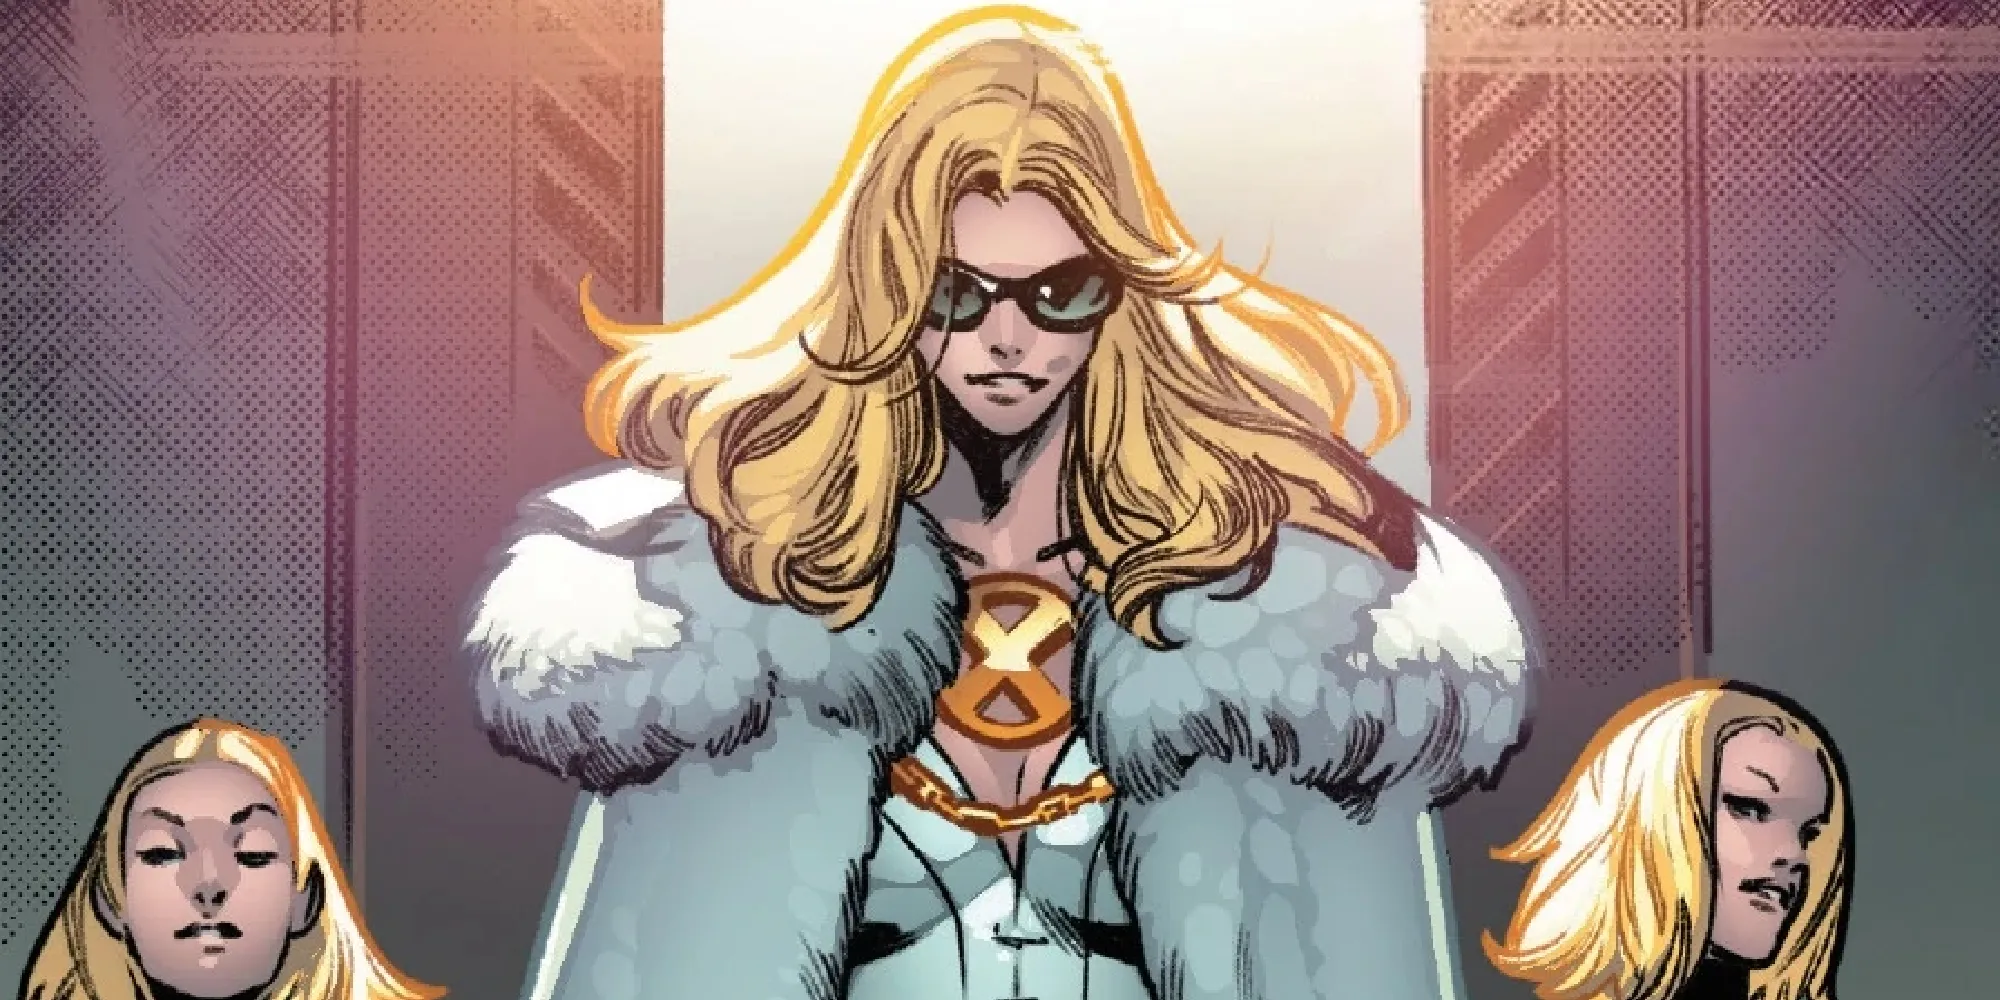 Emma Frost wearing shades and walking beside two blonde women in the comics